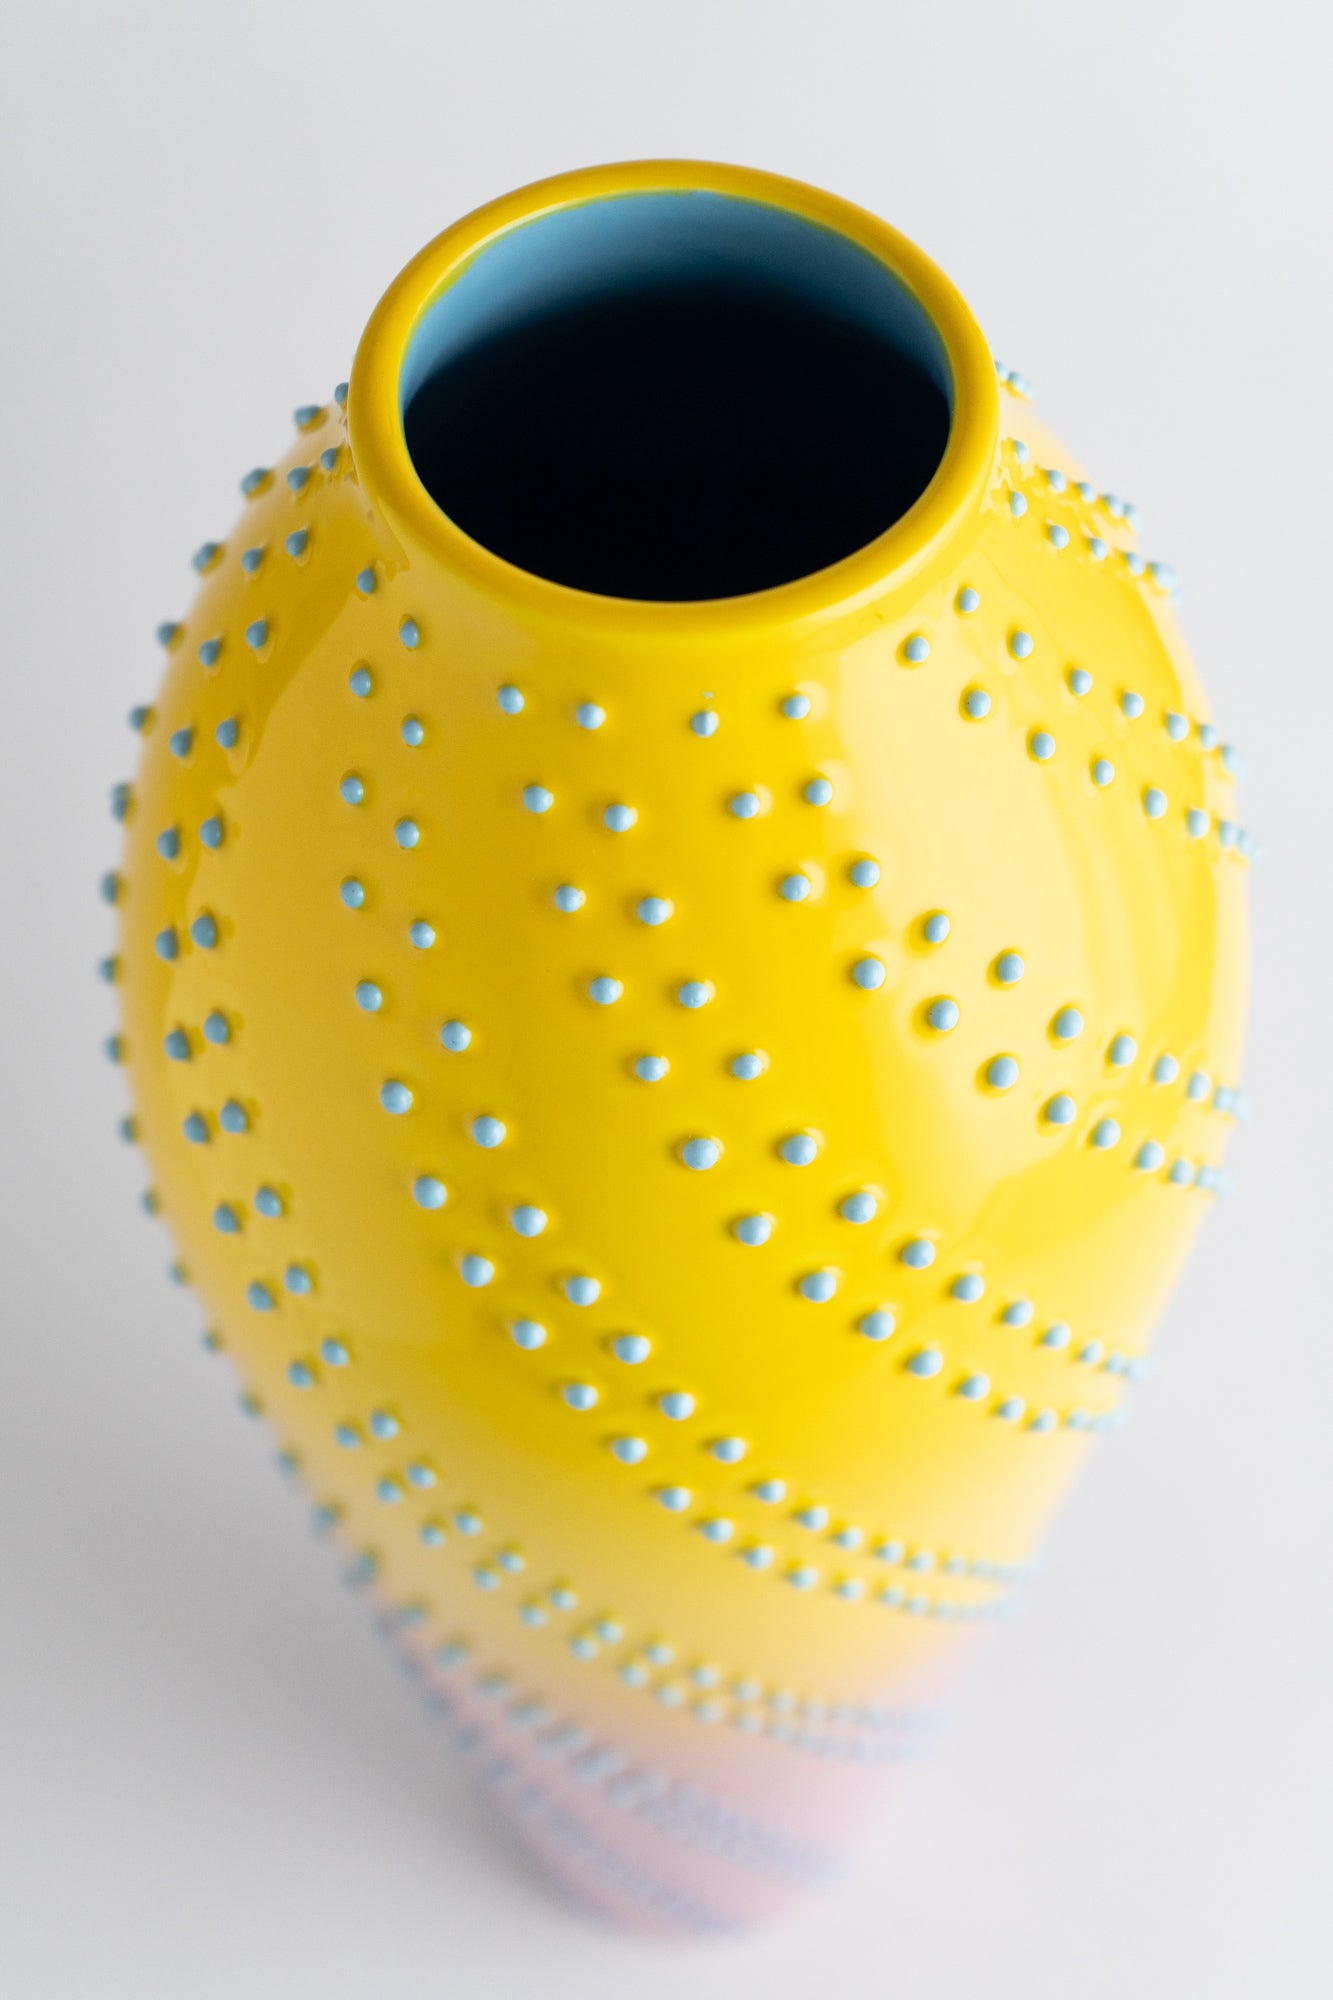 Princex vase by Adam Nathaniel Furman for Nuoveforme